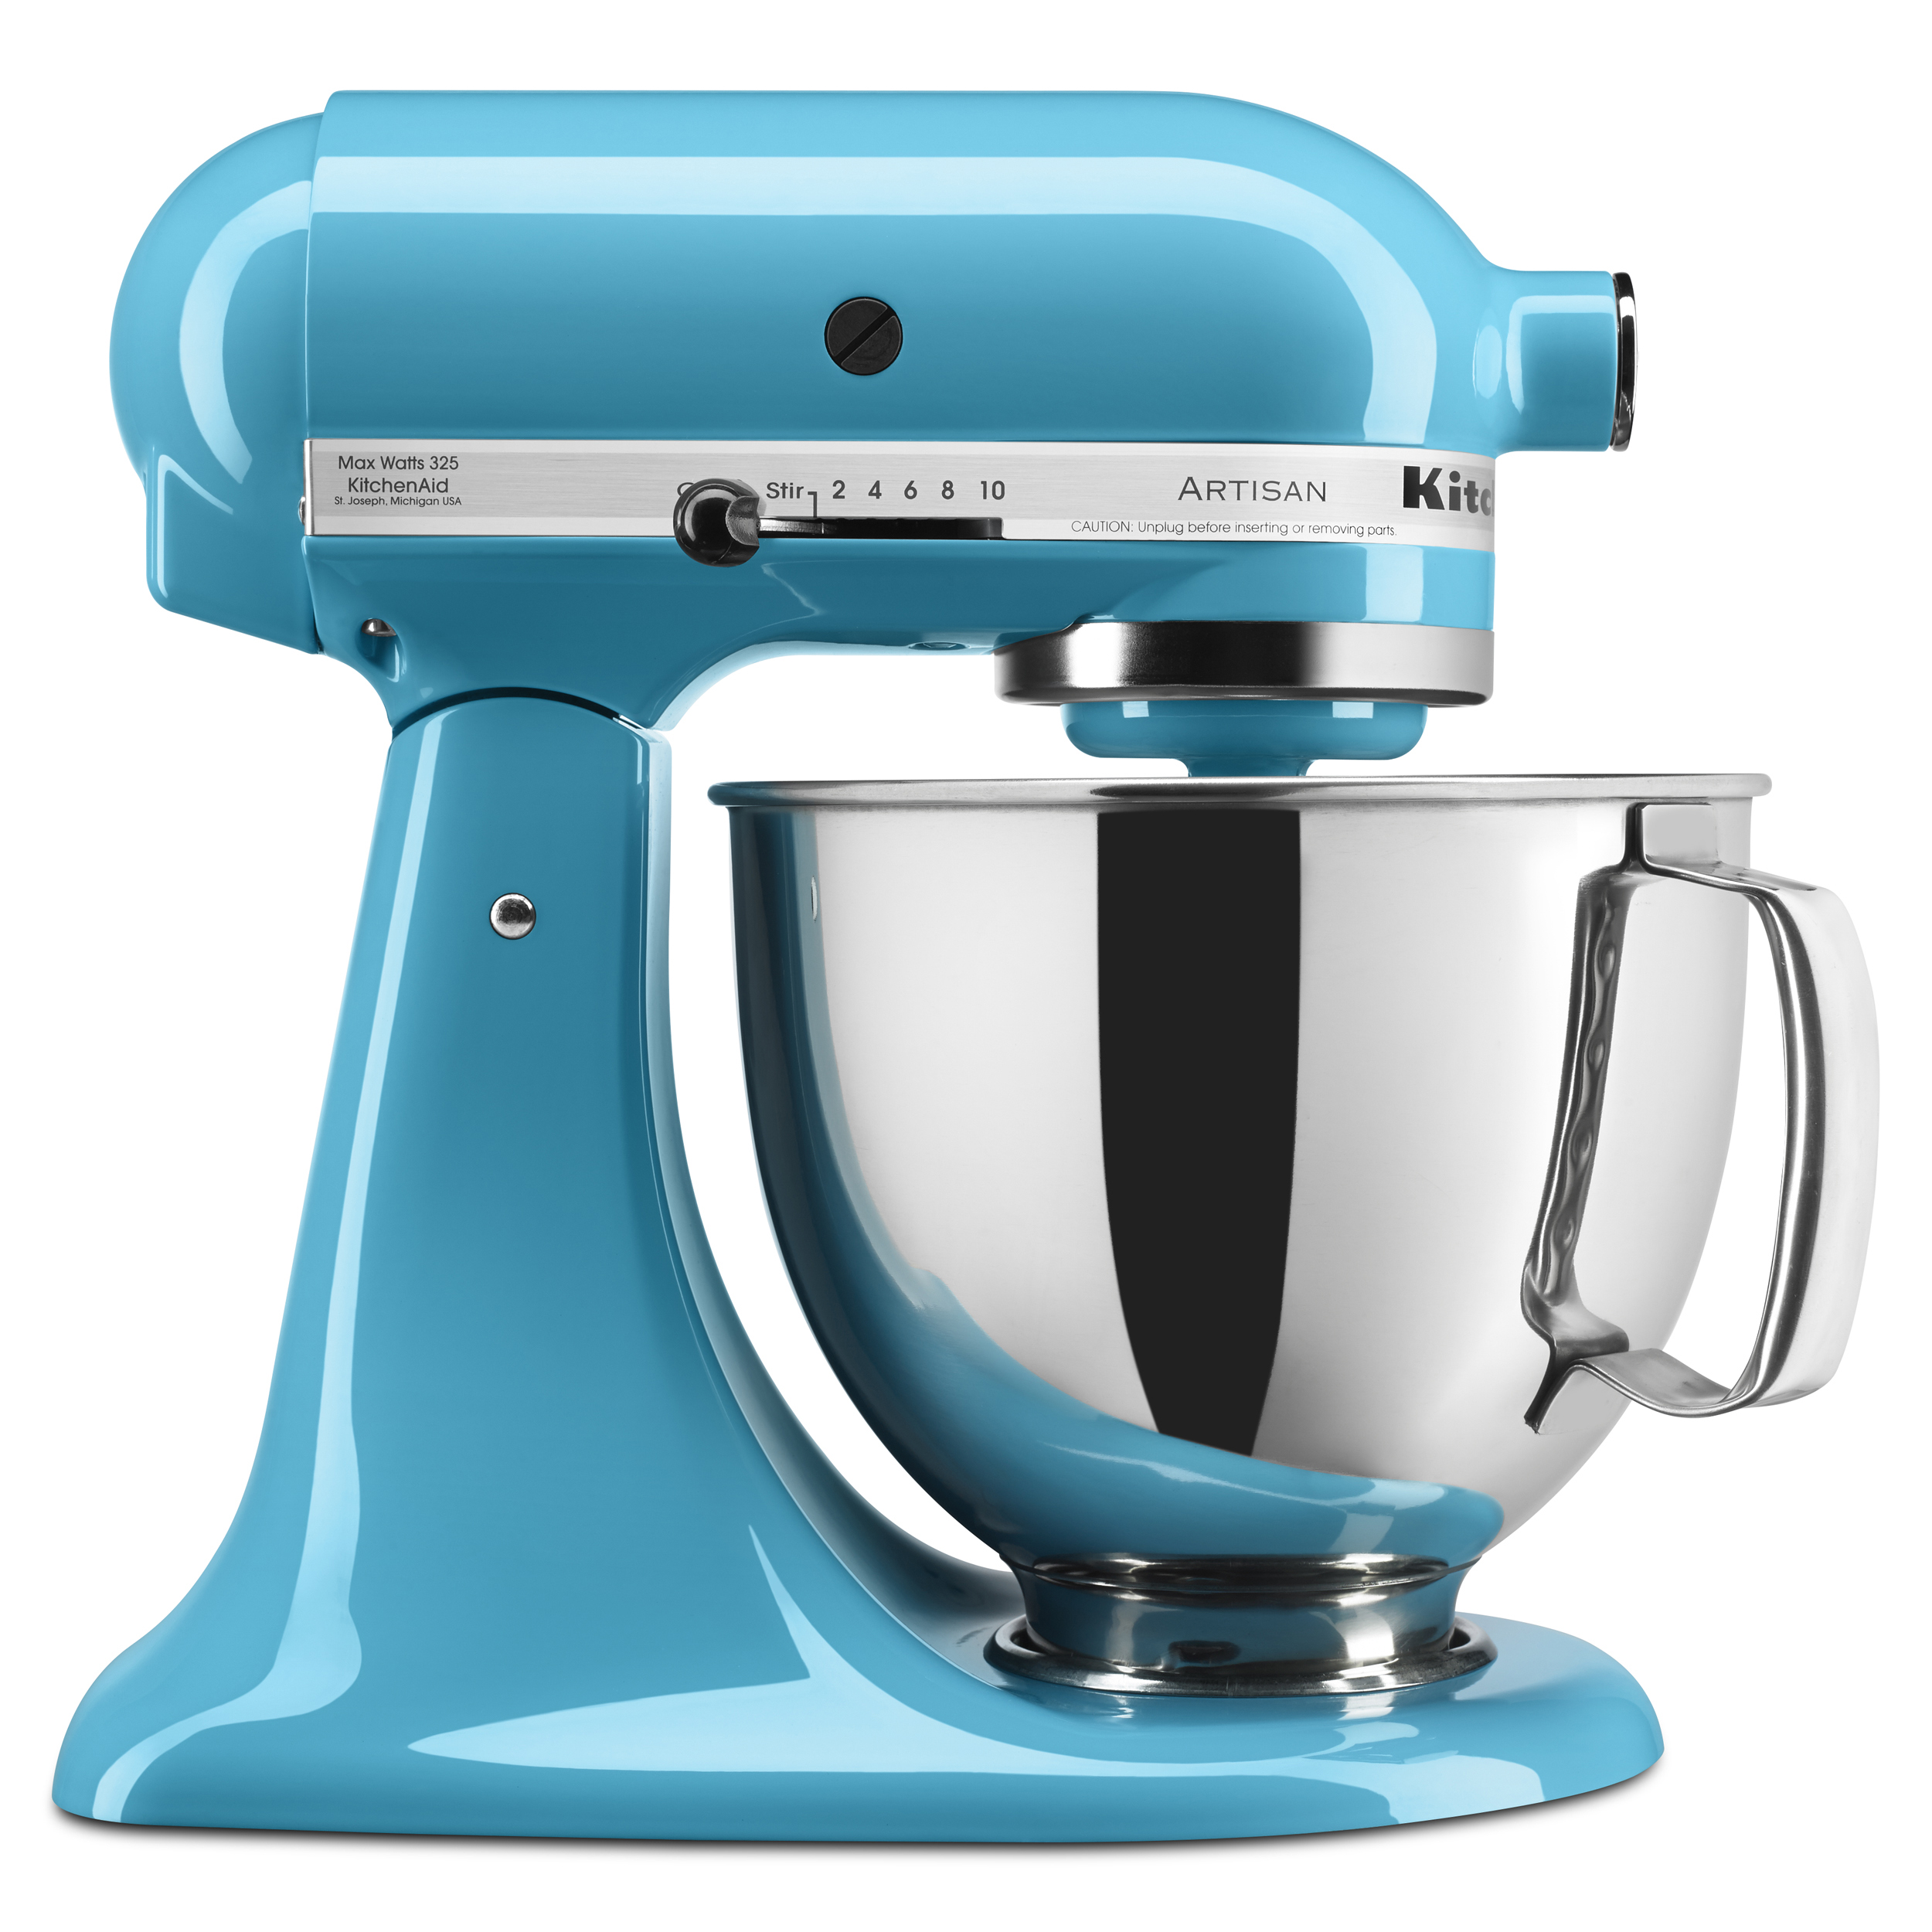 KitchenAid Artisan Series 5-Quart Tilt-Head Stand Mixer in Crystal Blue - KSM150PSCL - Closeout - image 1 of 4